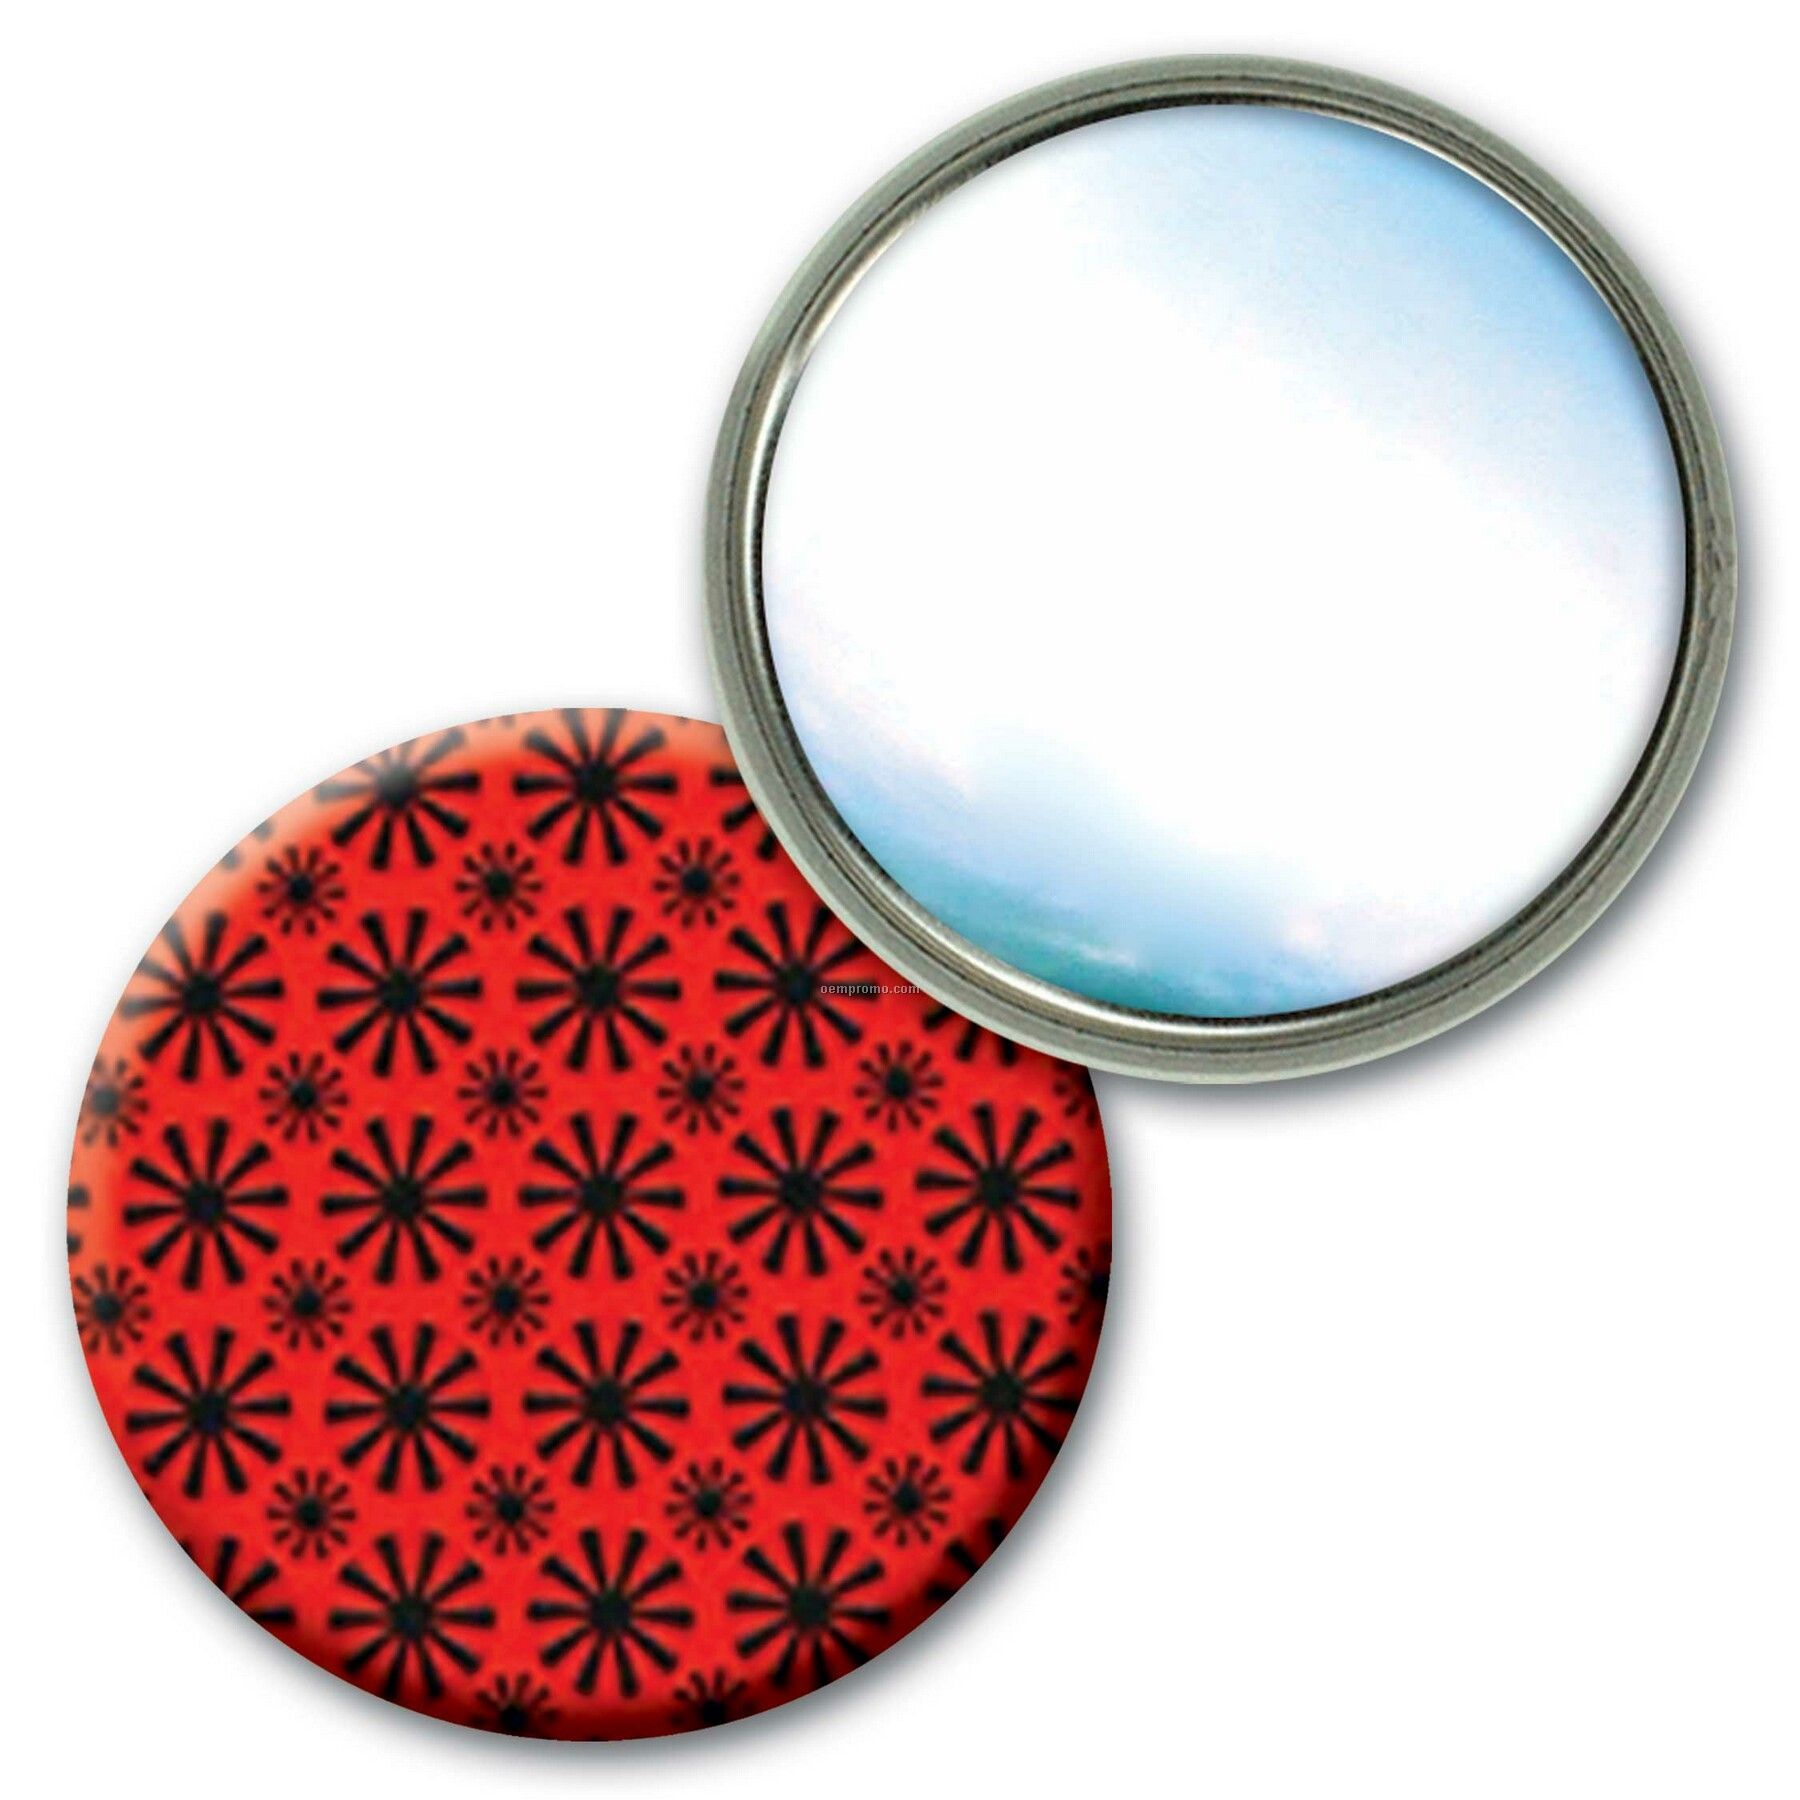 Compact Mirror Lenticular Animated Wheels Effect (Blank)